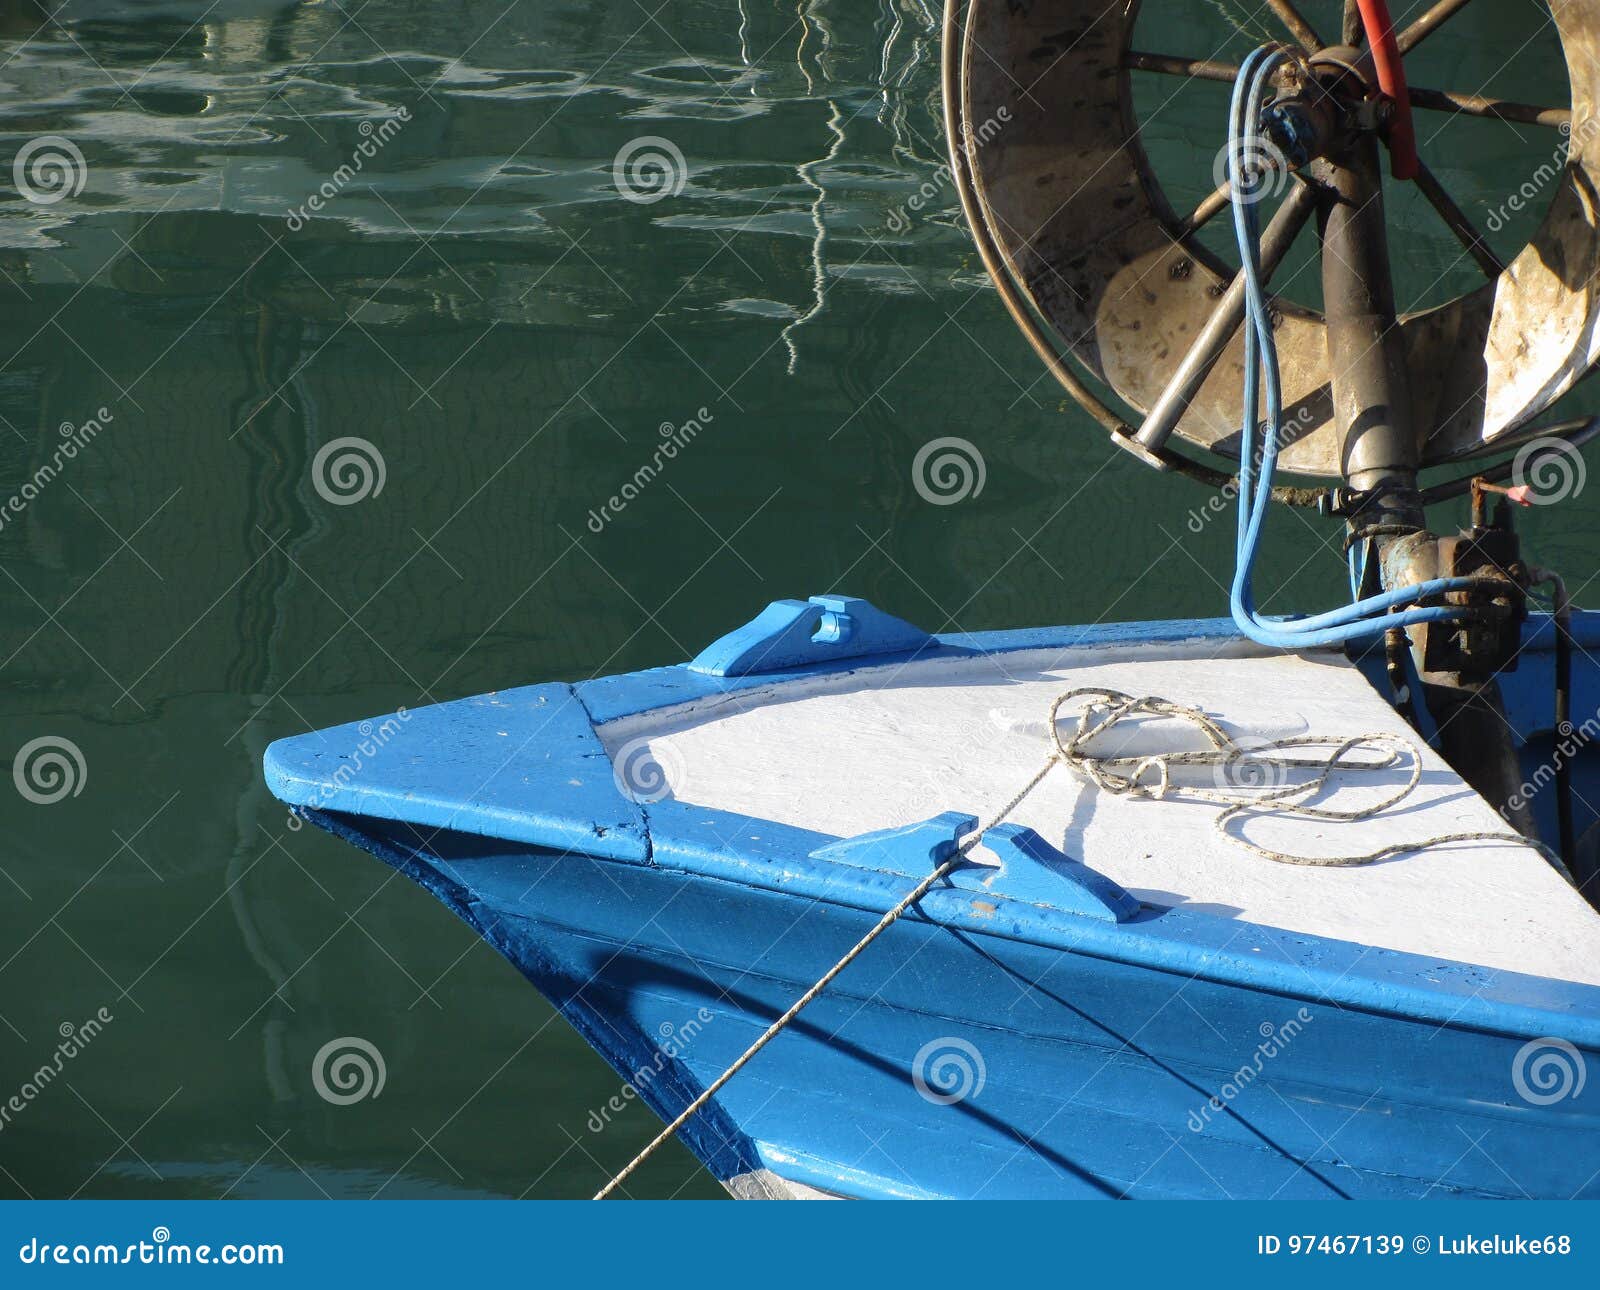 Prow of a Wooden Fishing Boat with Trawl Winch on the Deck . the